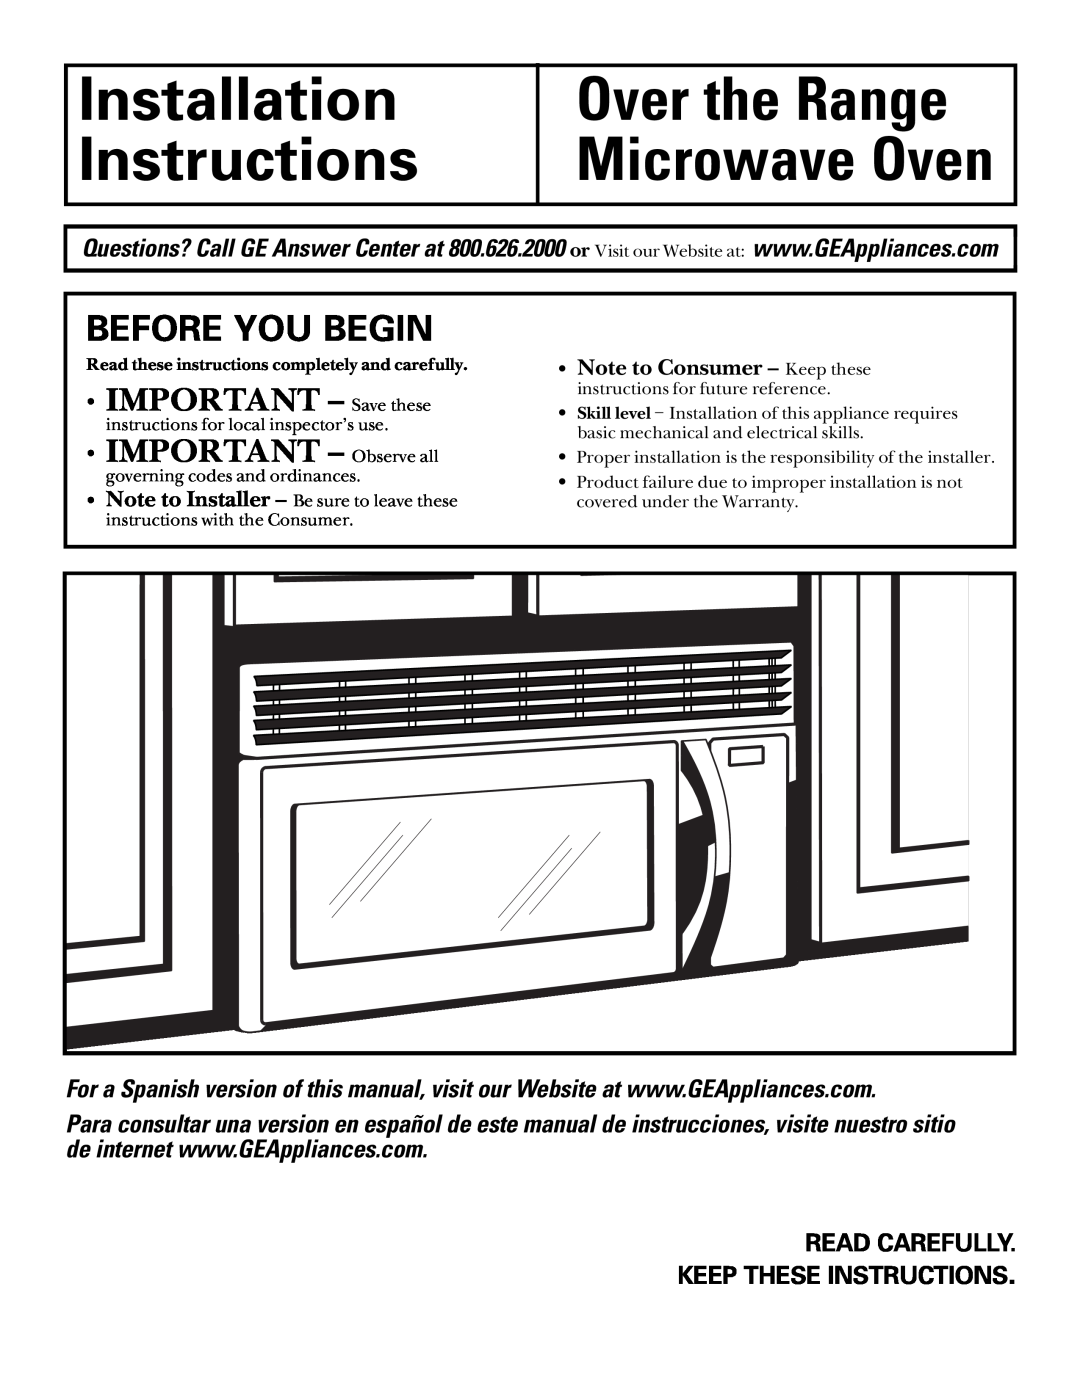 GE Over the Range Microwave Oven manual Before You Begin, Read Carefully Keep These Instructions, IMPORTANT - Save these 